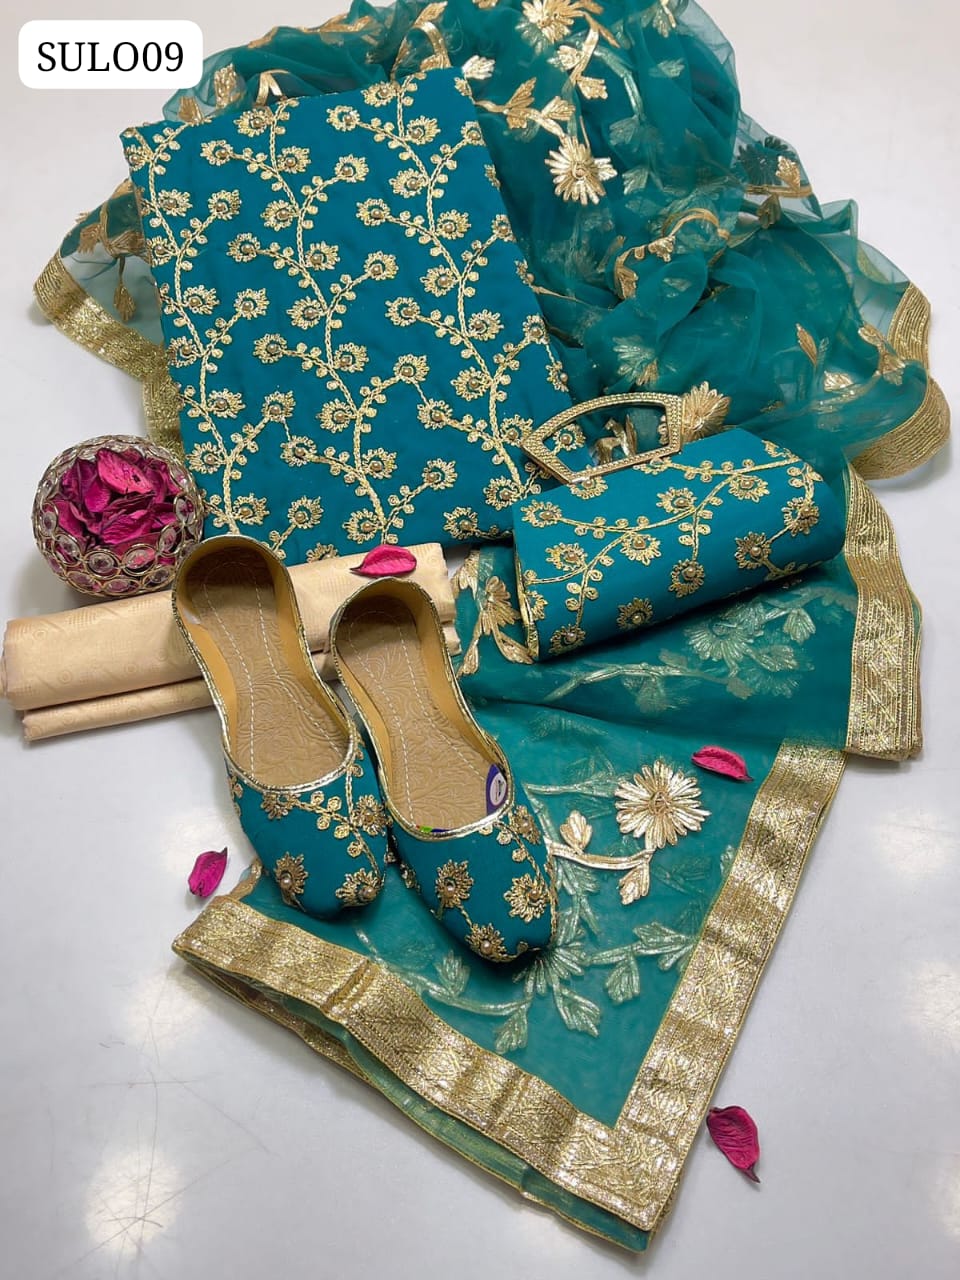 Crinkle Chiffon Fabric Marble And Gotta Embroidery Work Shirt With Indian Net Original Gotta Work Dupatta With 4 Side Indian Border Lass And Self Embossed Masuri Trouser 5Pc Dress With khussa & Matching Clutch